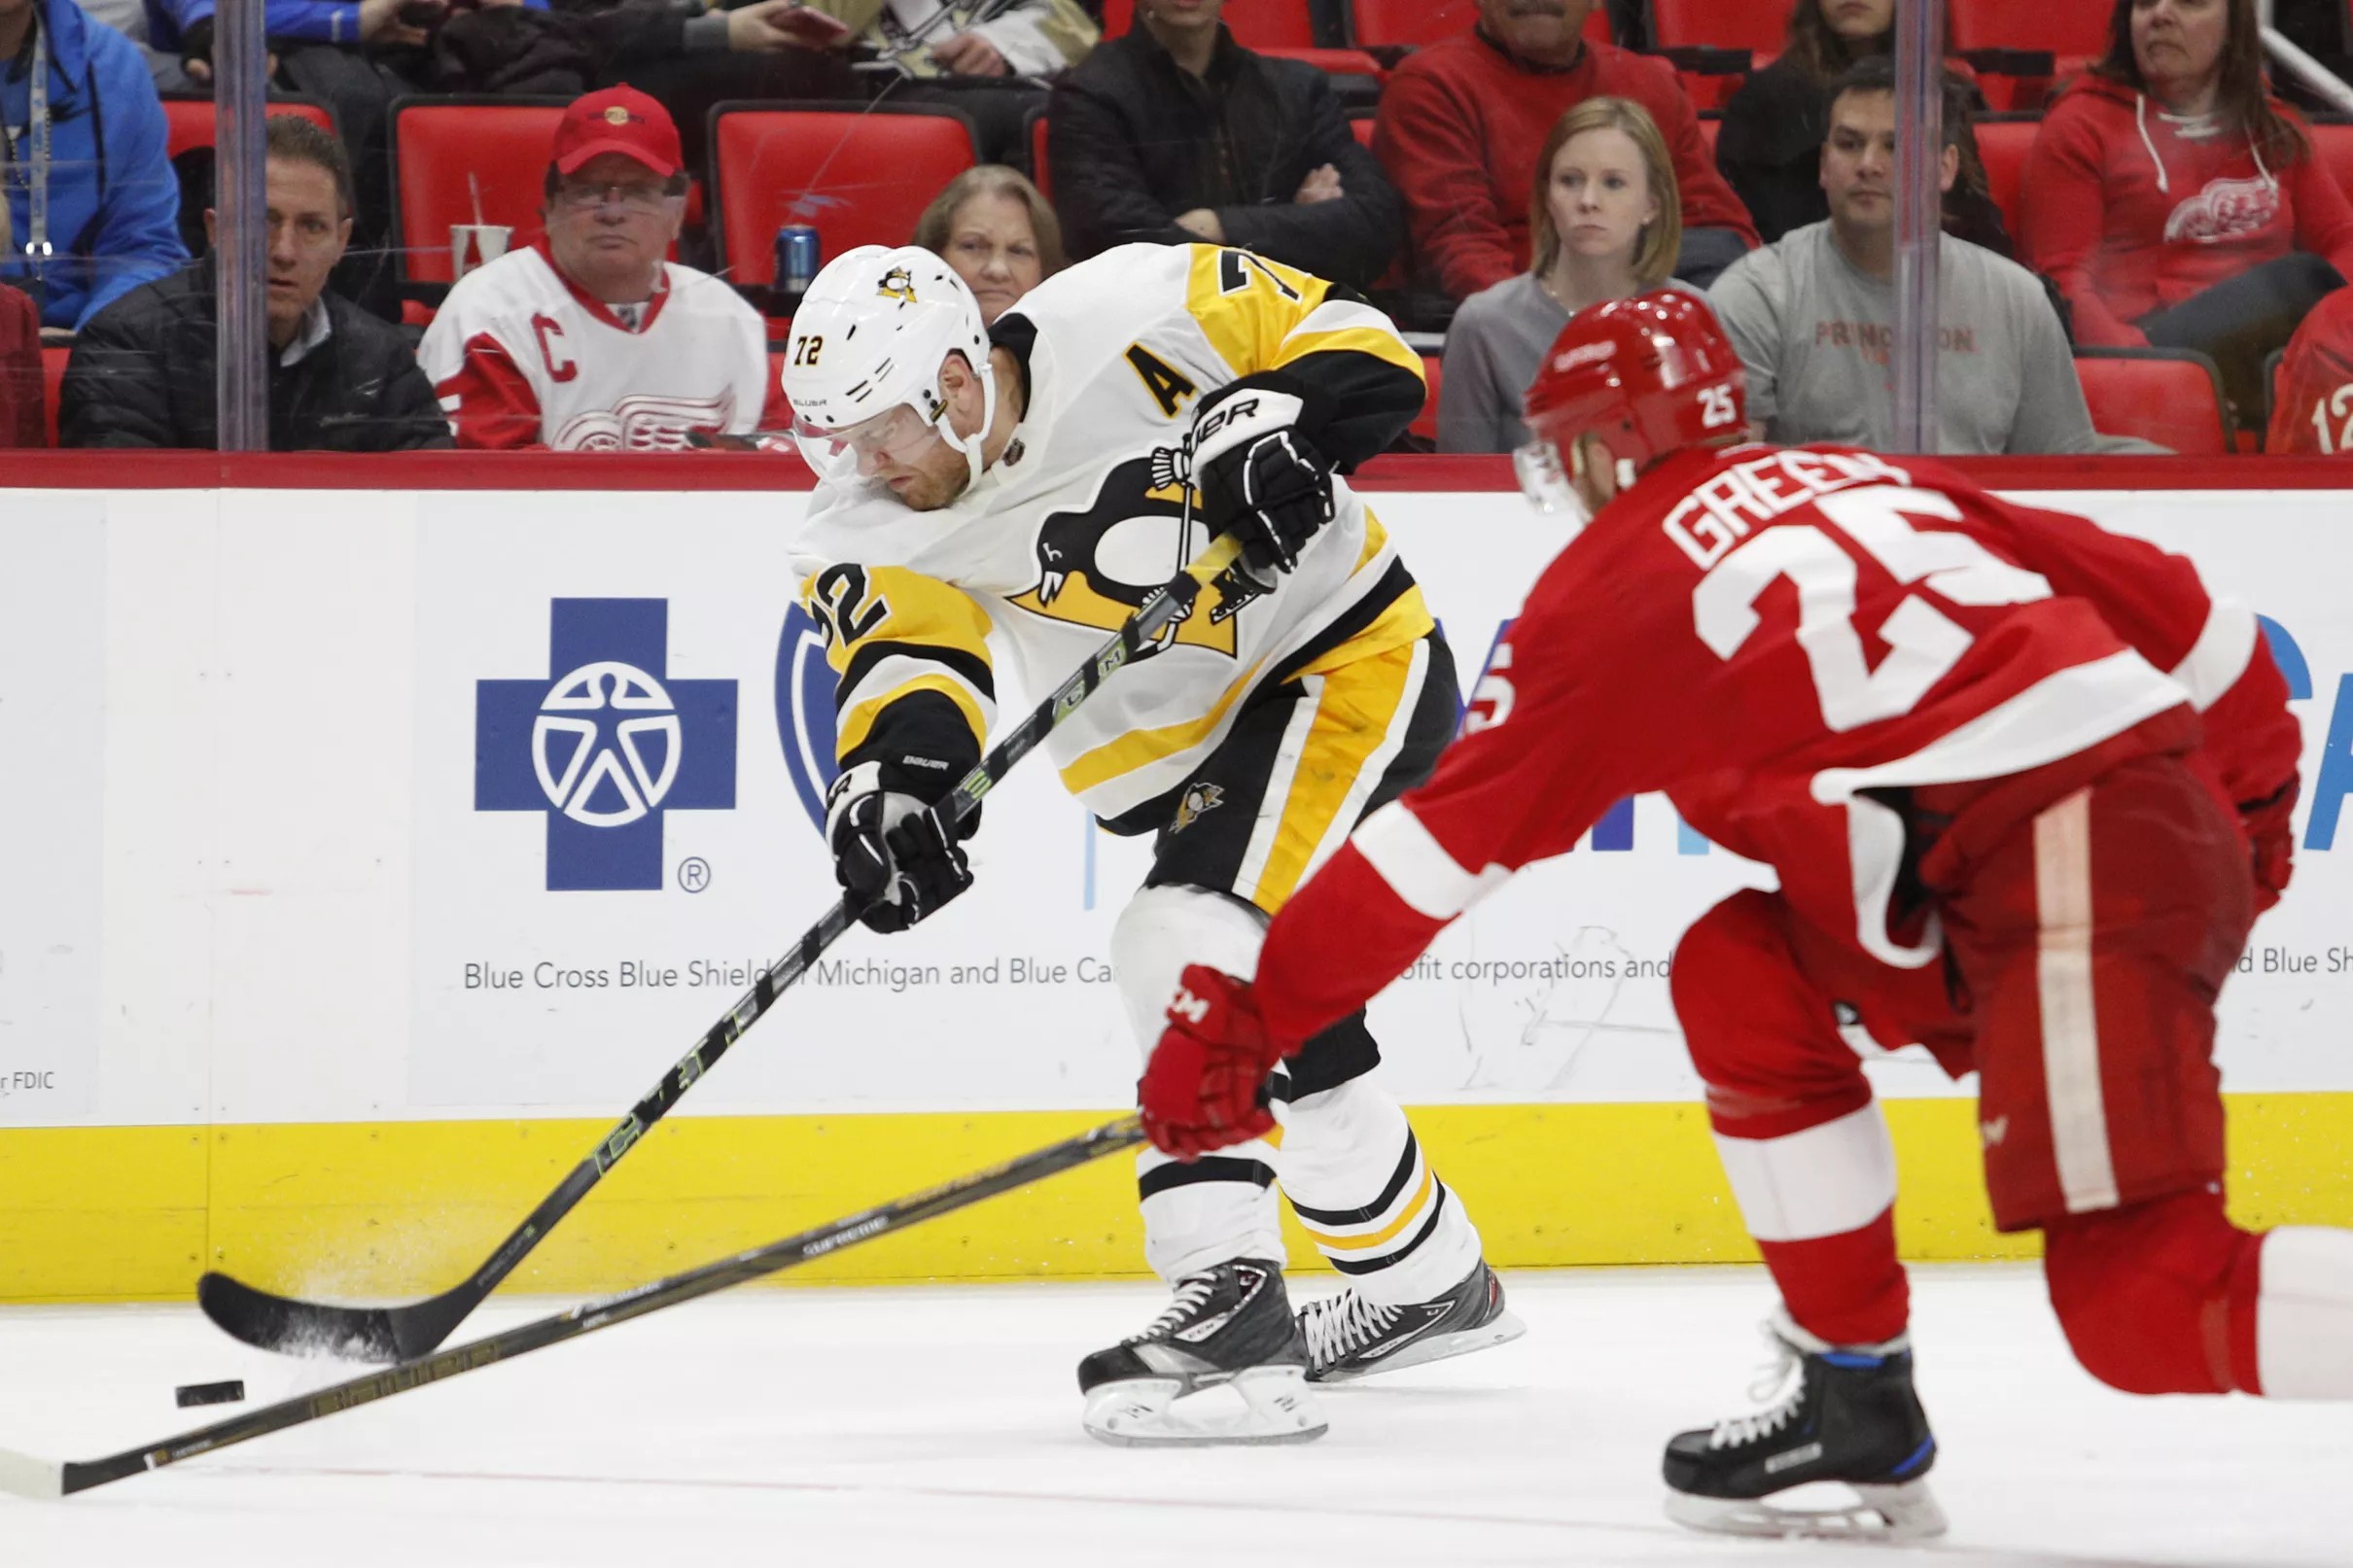 Game Preview Penguins vs. Red Wings